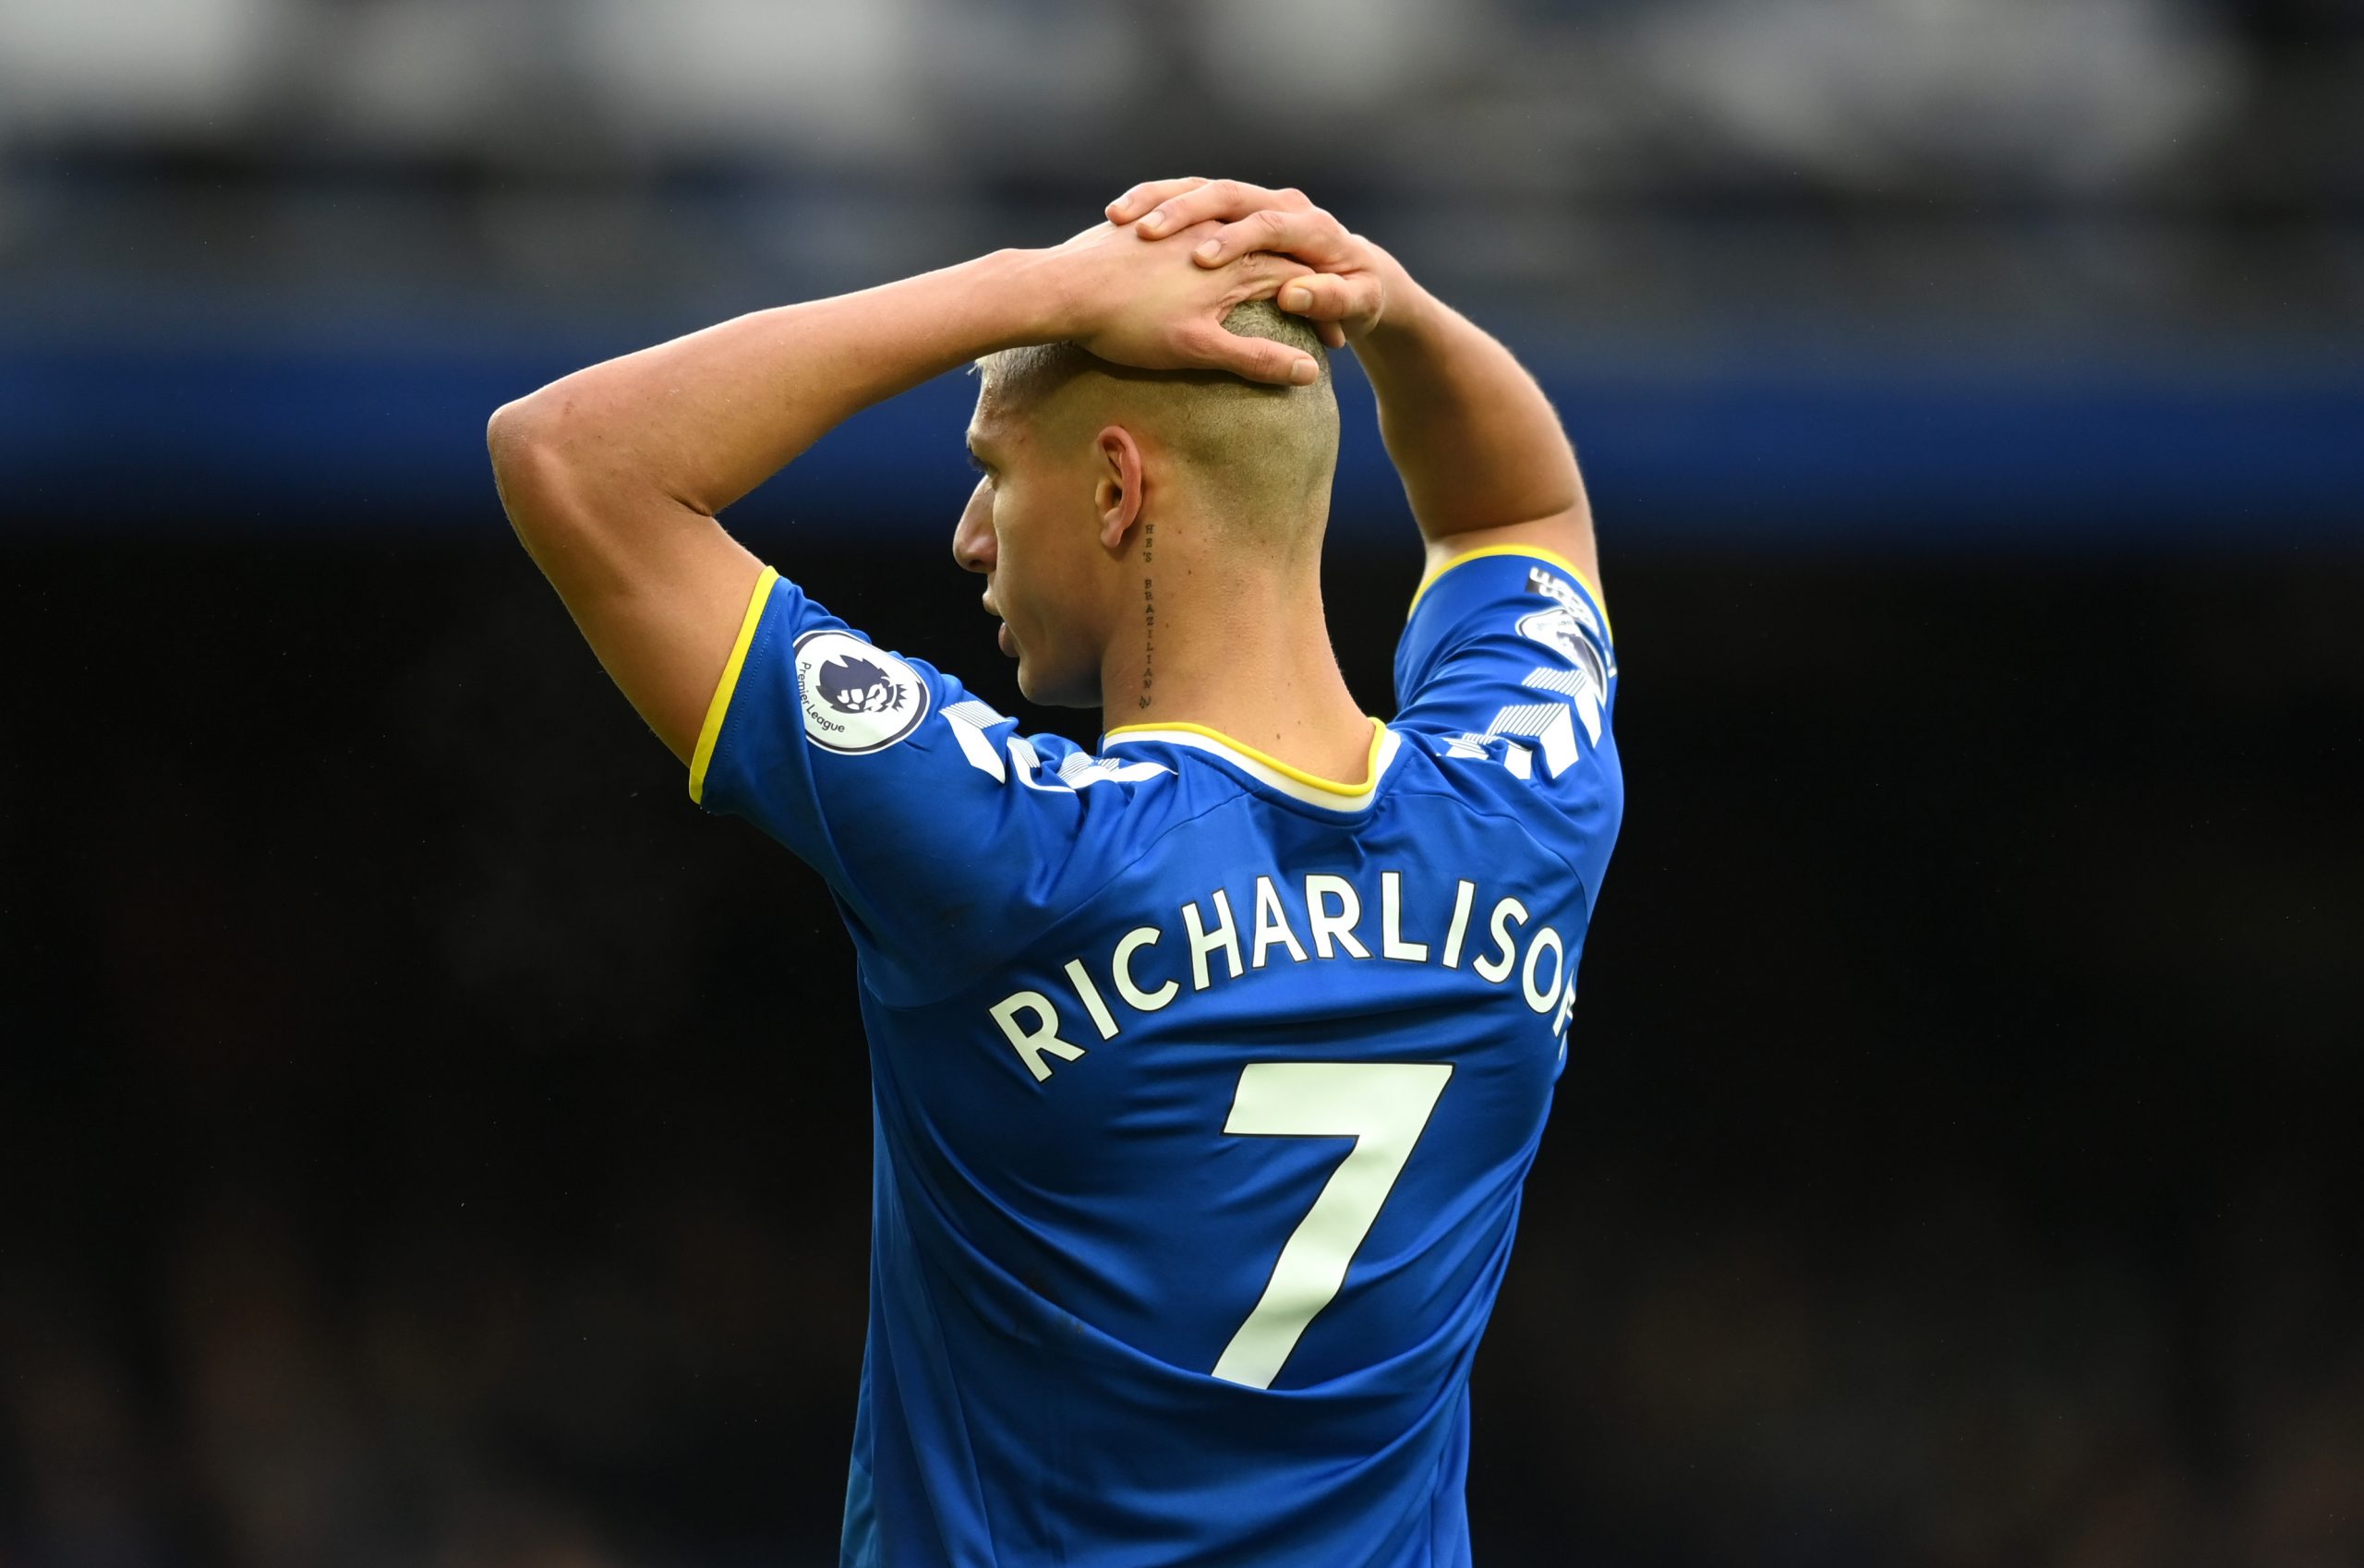 LIVERPOOL, ENGLAND - JANUARY 22: Richarlison of Everton  reacts during the Premier League match between Everton and Aston Villa at Goodison Park on January 22, 2022 in Liverpool, England. (Photo by Michael Regan/Getty Images)The 4th Official uses images provided by the following image agency: Getty Images (https://www.gettyimages.de/) and Imago Images (https://www.imago-images.de/)